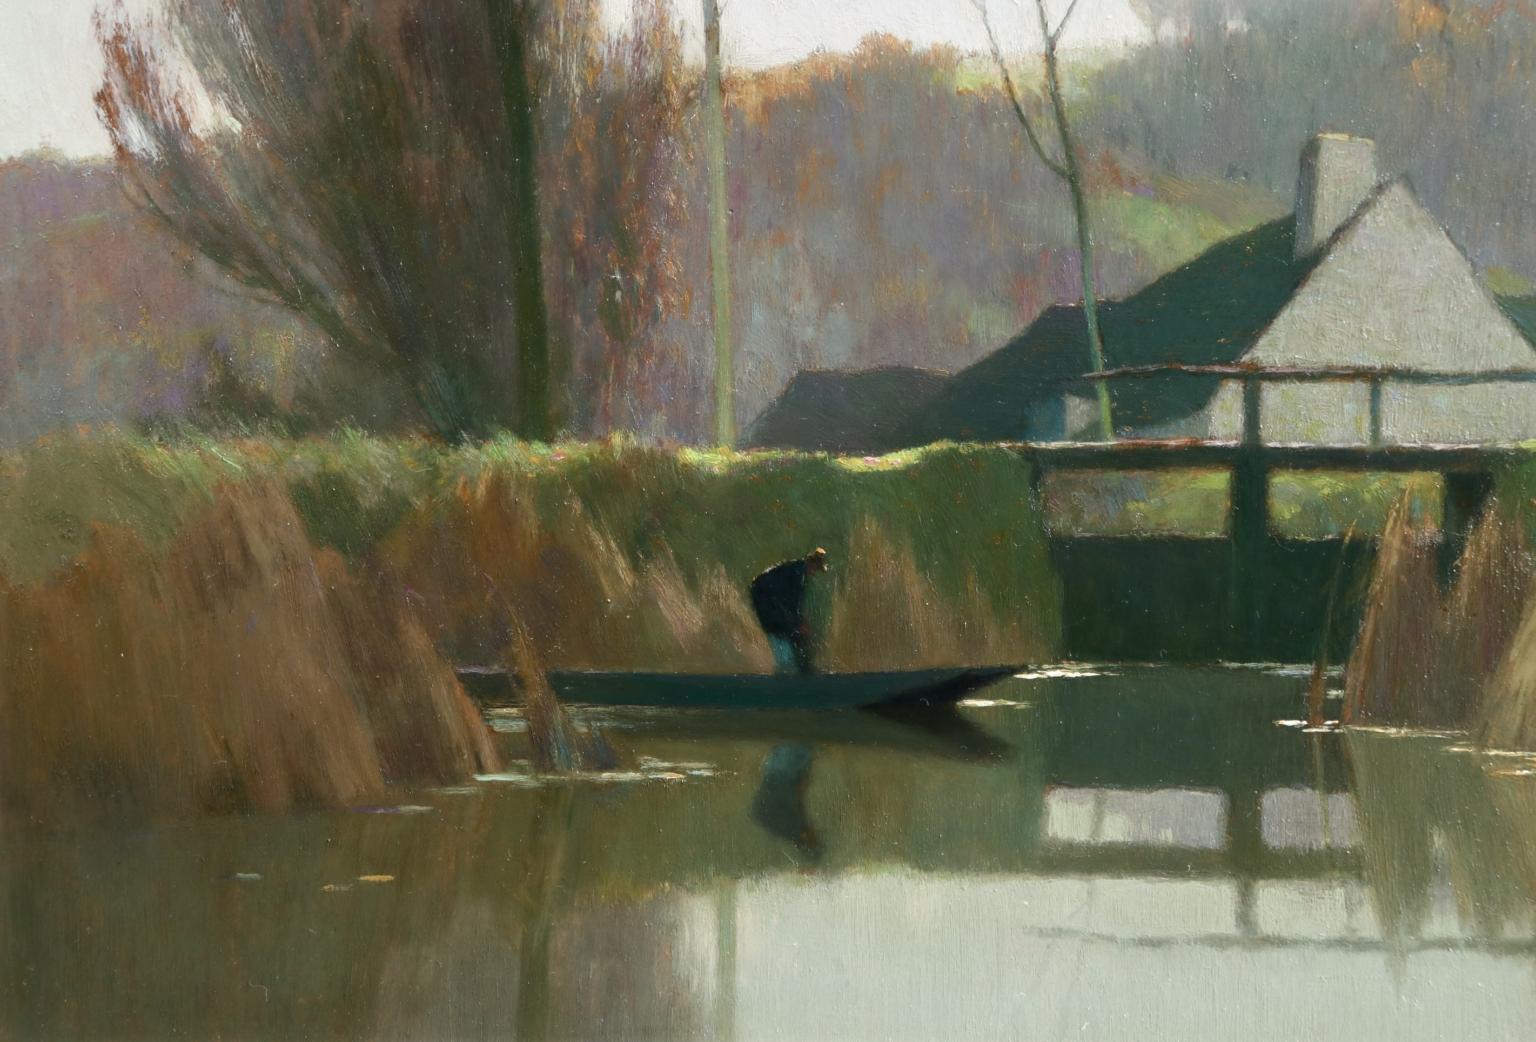 Oil on board circa 1940 by French painter Alexandre Louis Jacob depicting a figure on a riverbank by a cottage on a cool, still day in autumn. Signed lower right. Framed dimensions are 30 inches high by 26 inches wide.

Jacob was a pupil of Eugène